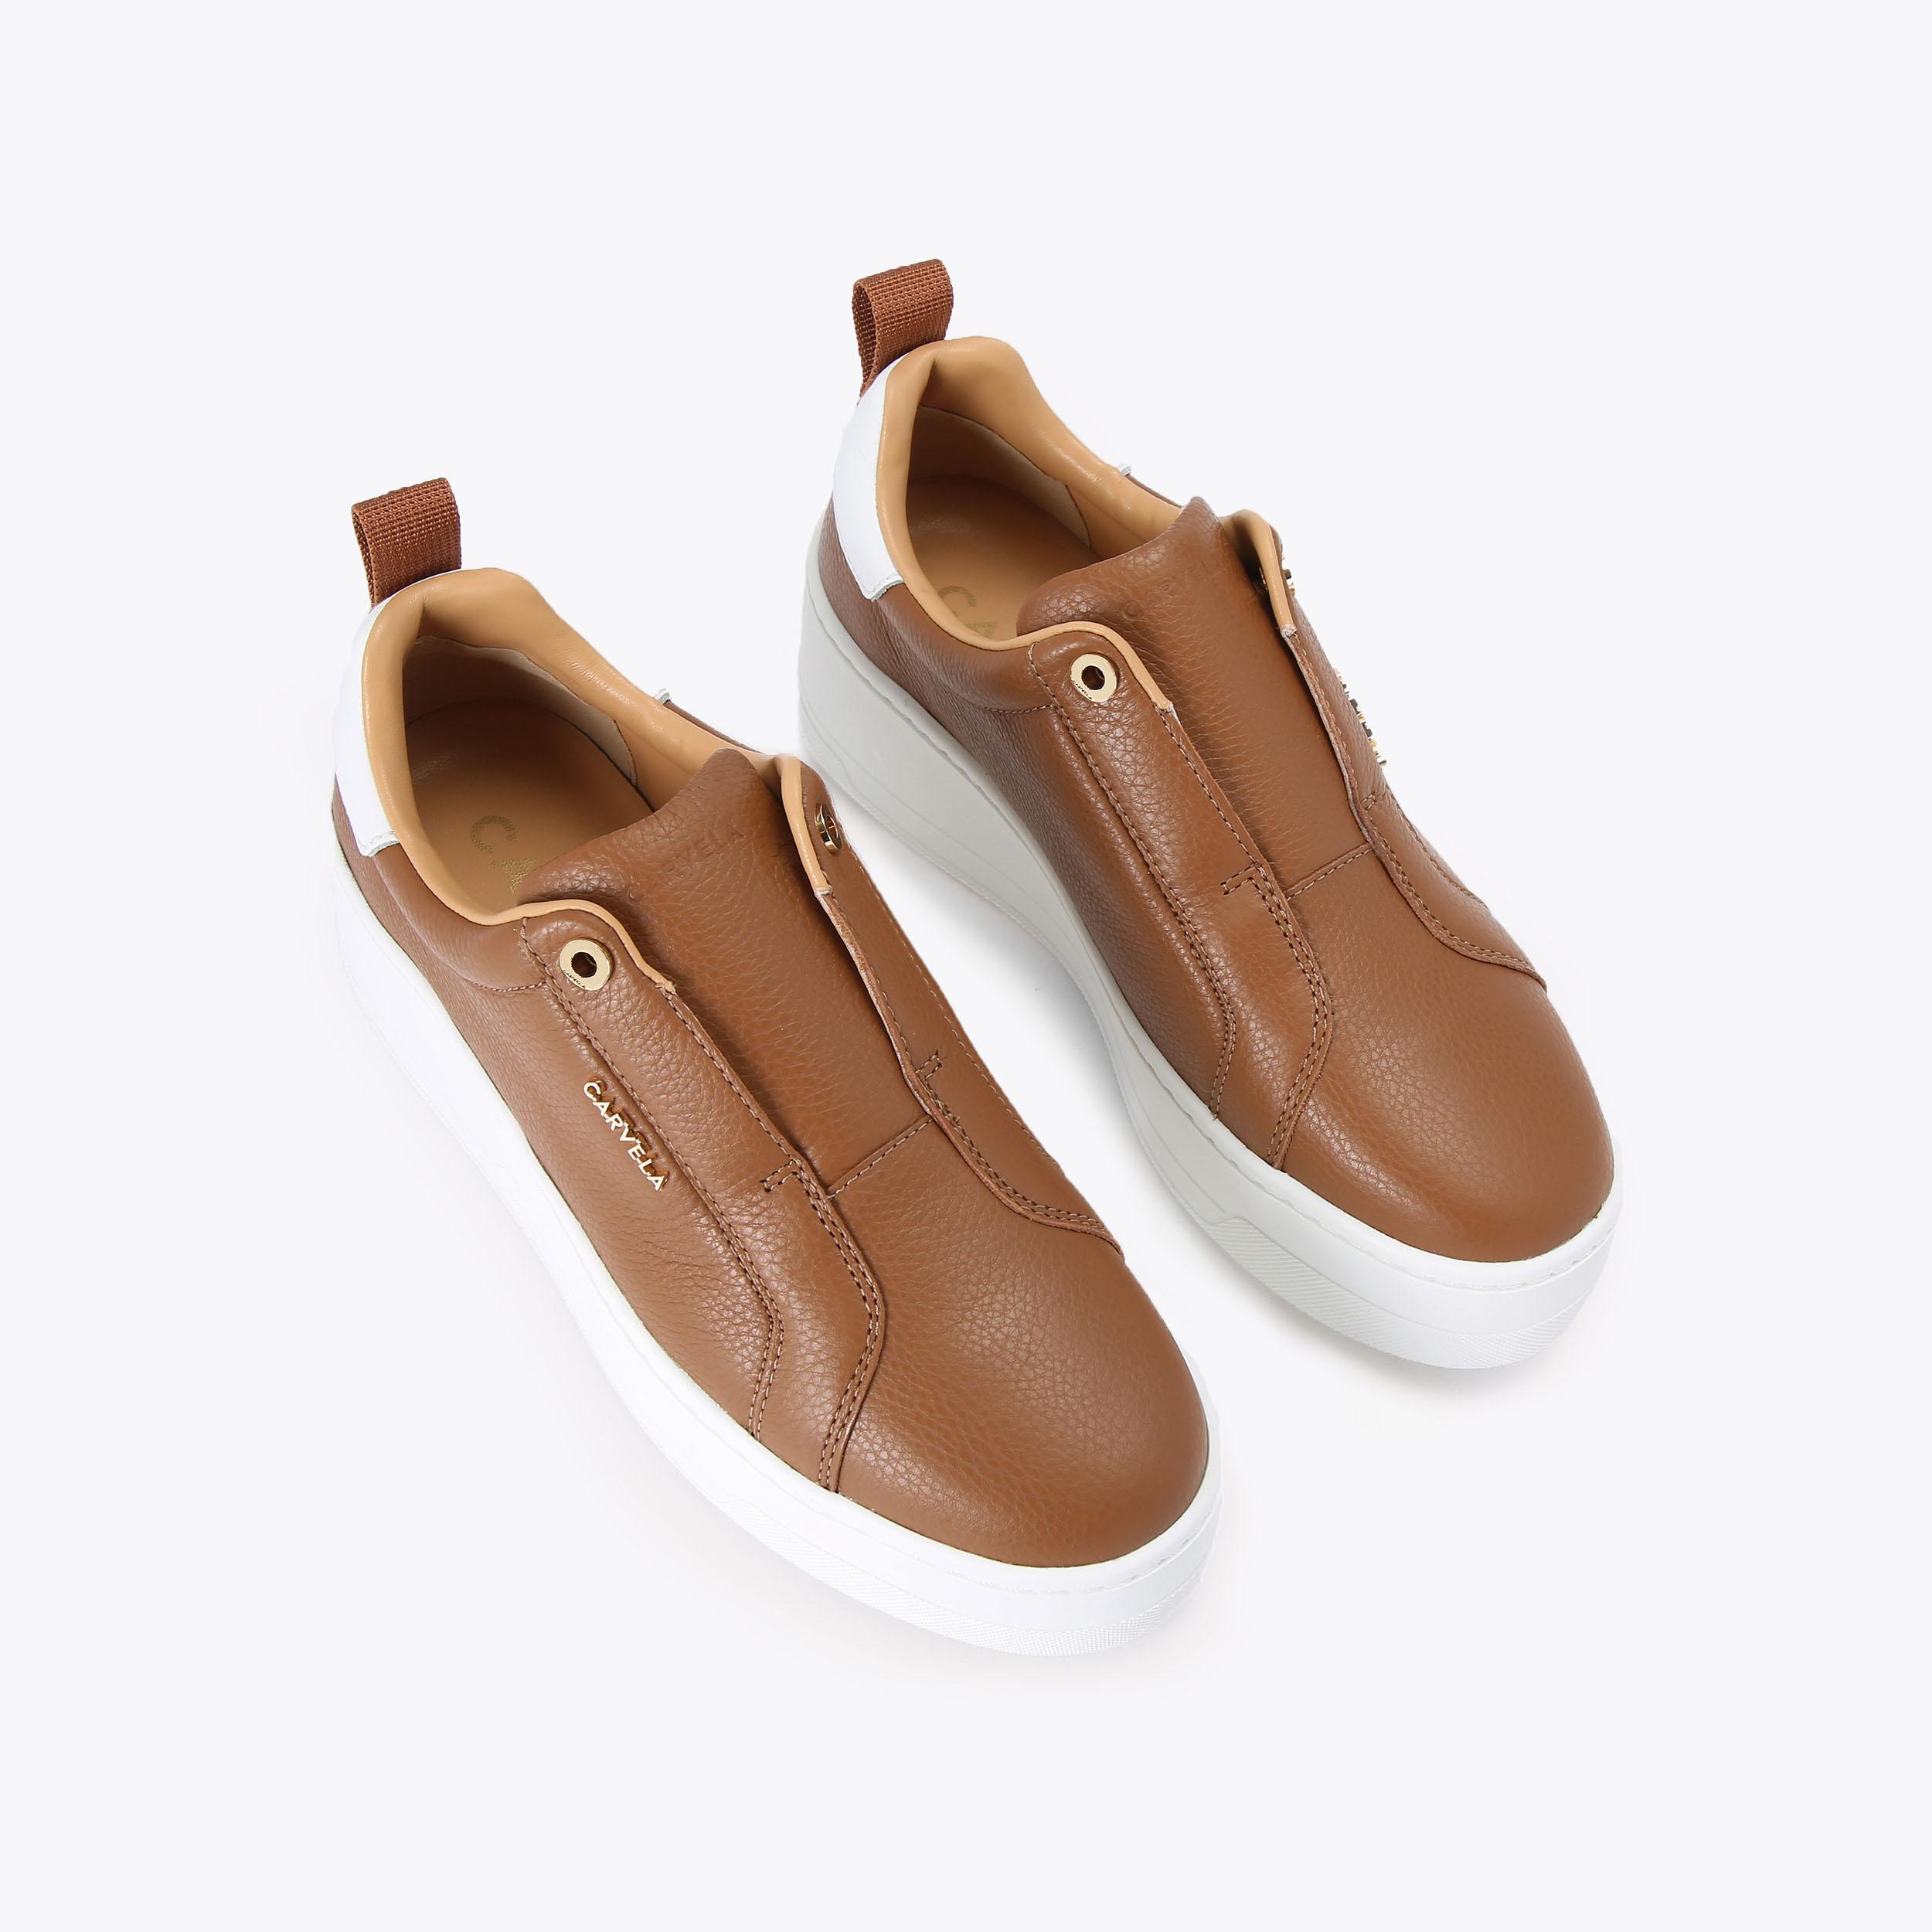 CONNECTED LACELESS Tan Leather Trainers by CARVELA